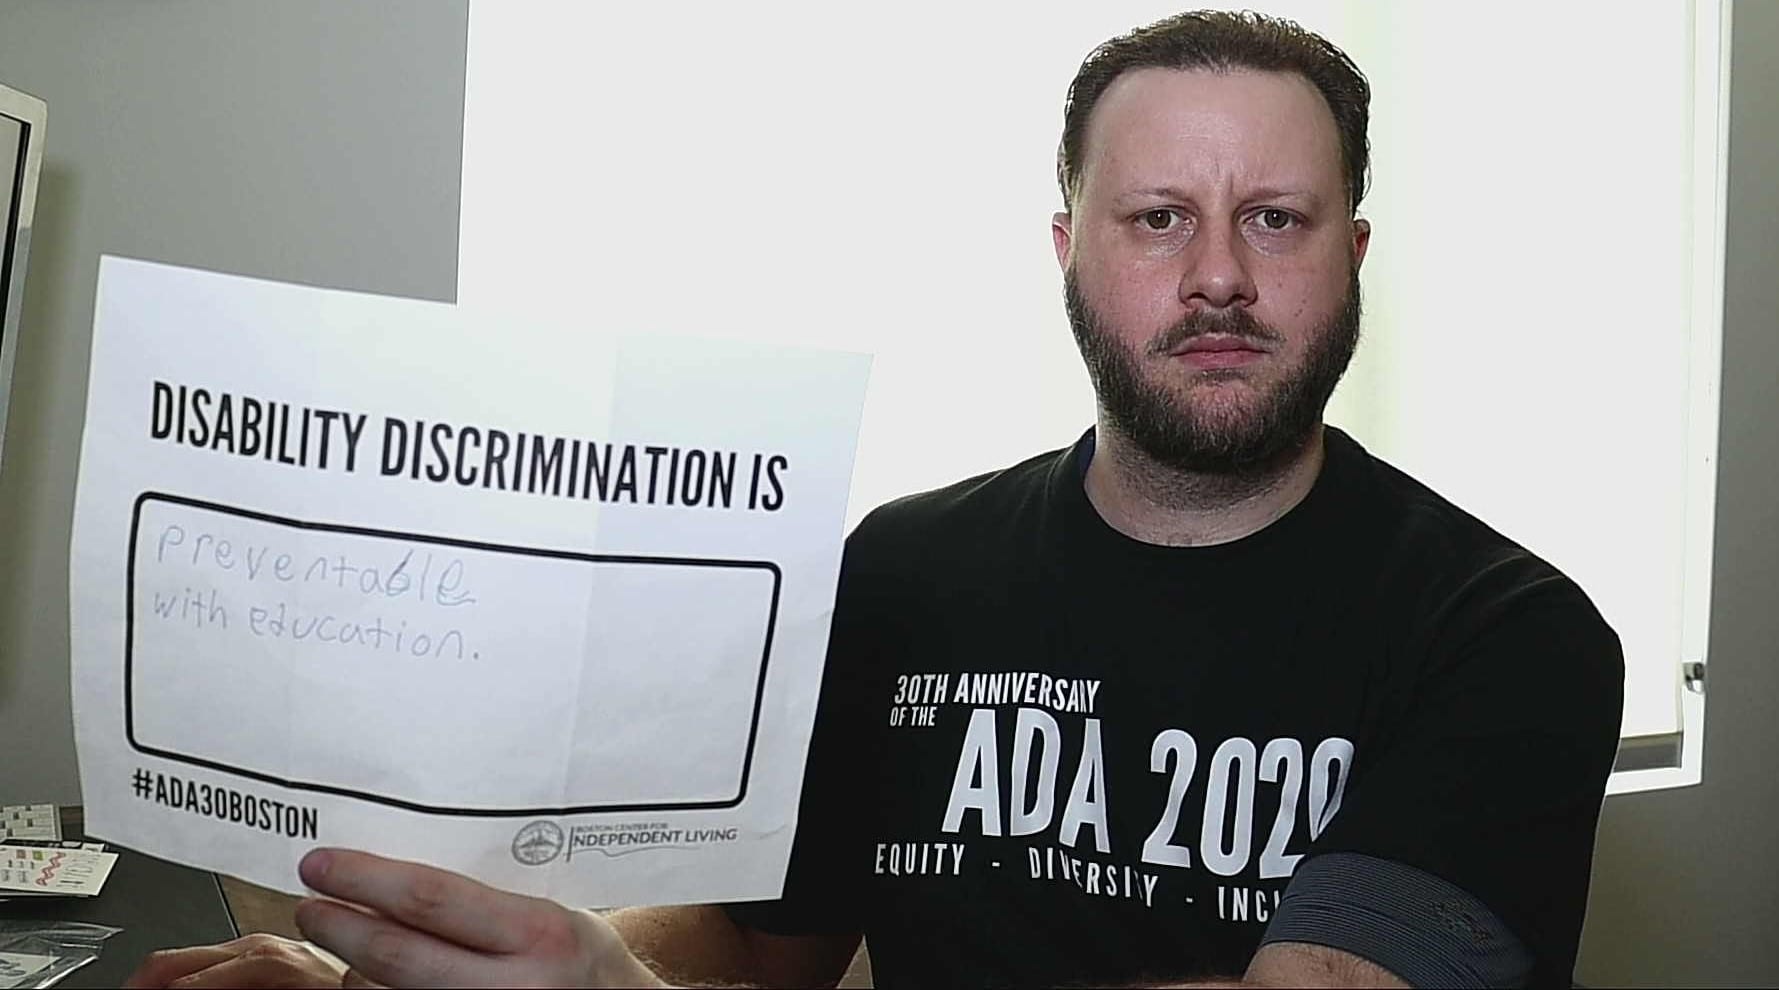 A person in a black ADA 30 t-shirt holds up a sign saying DISABILITY DISCRIMINATION IS PREVENTABLE WITH EDUCATION.